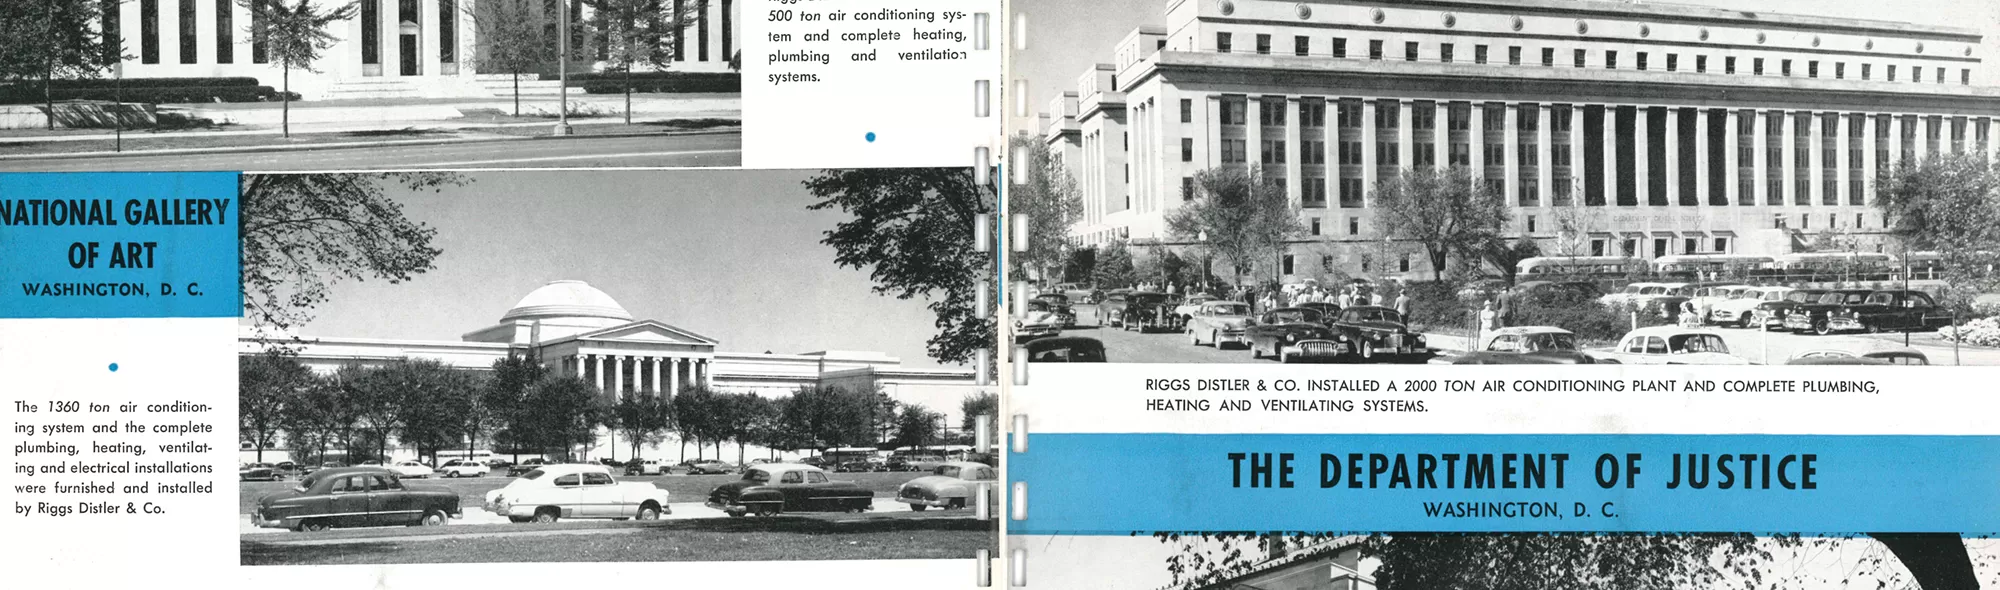 Spread from a booklet showing buildings around Washington D.C.